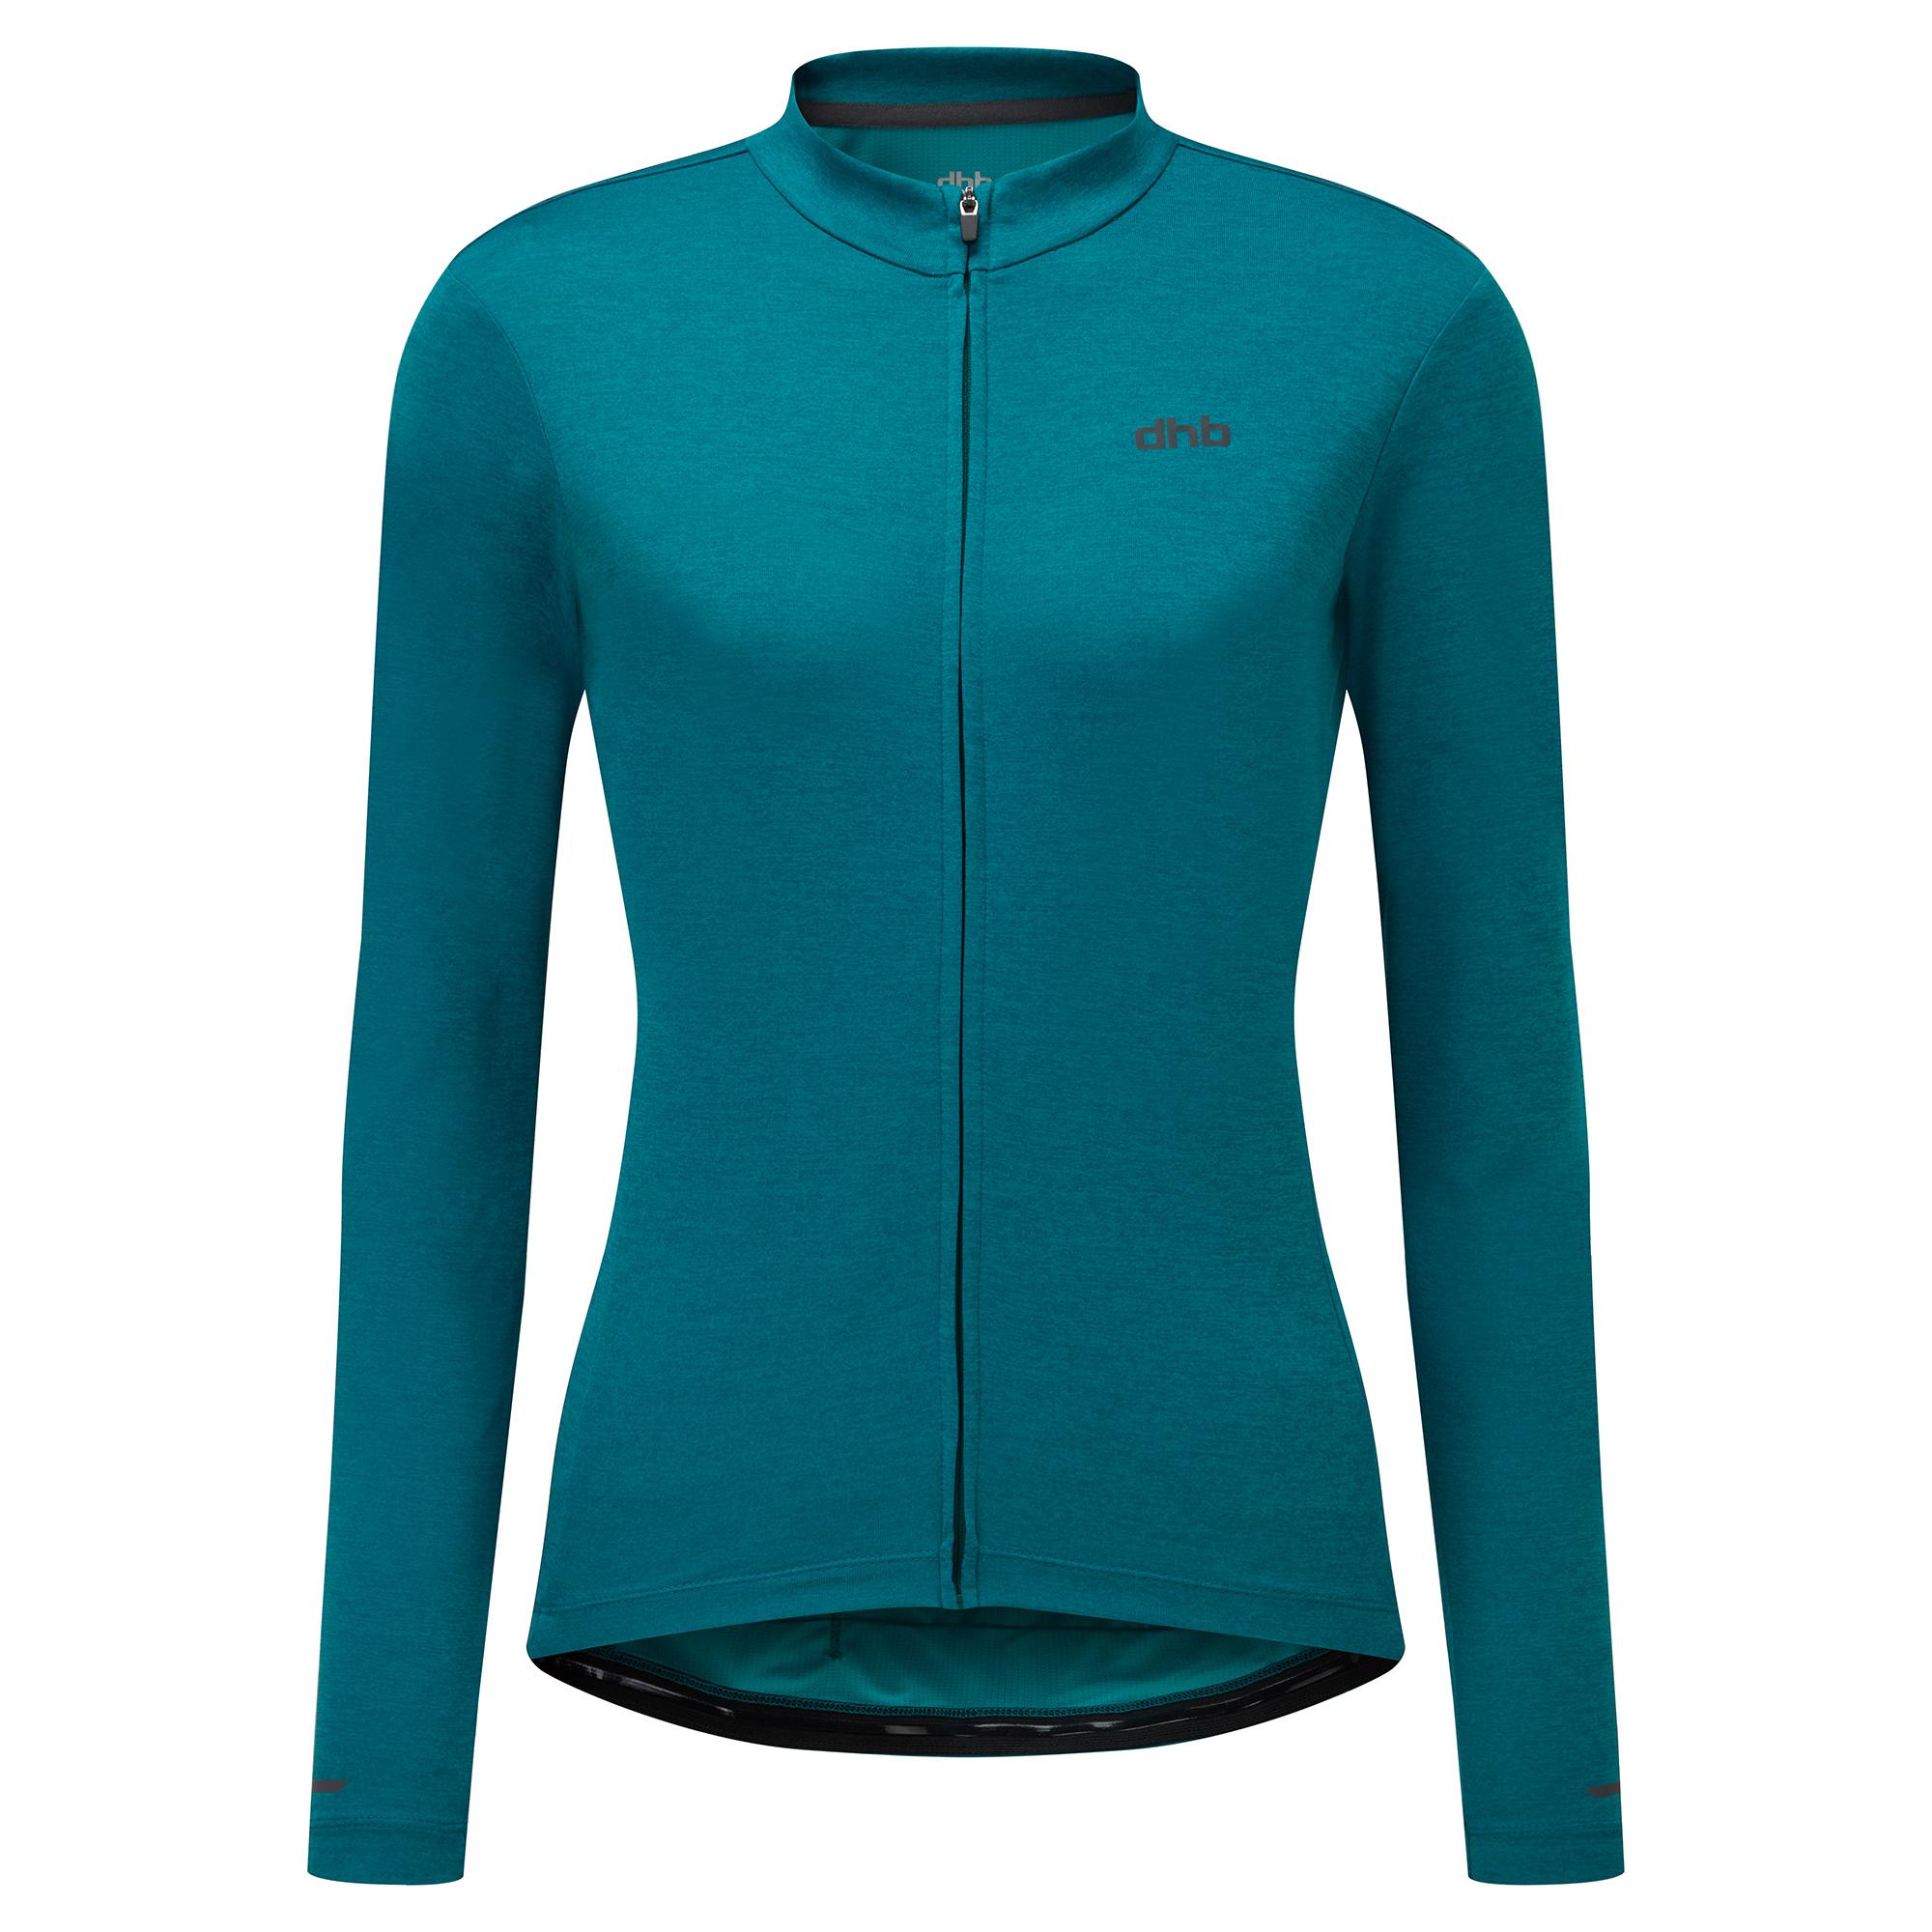 Dhb Womens Long Sleeve Jersey 2.0  Turquoise